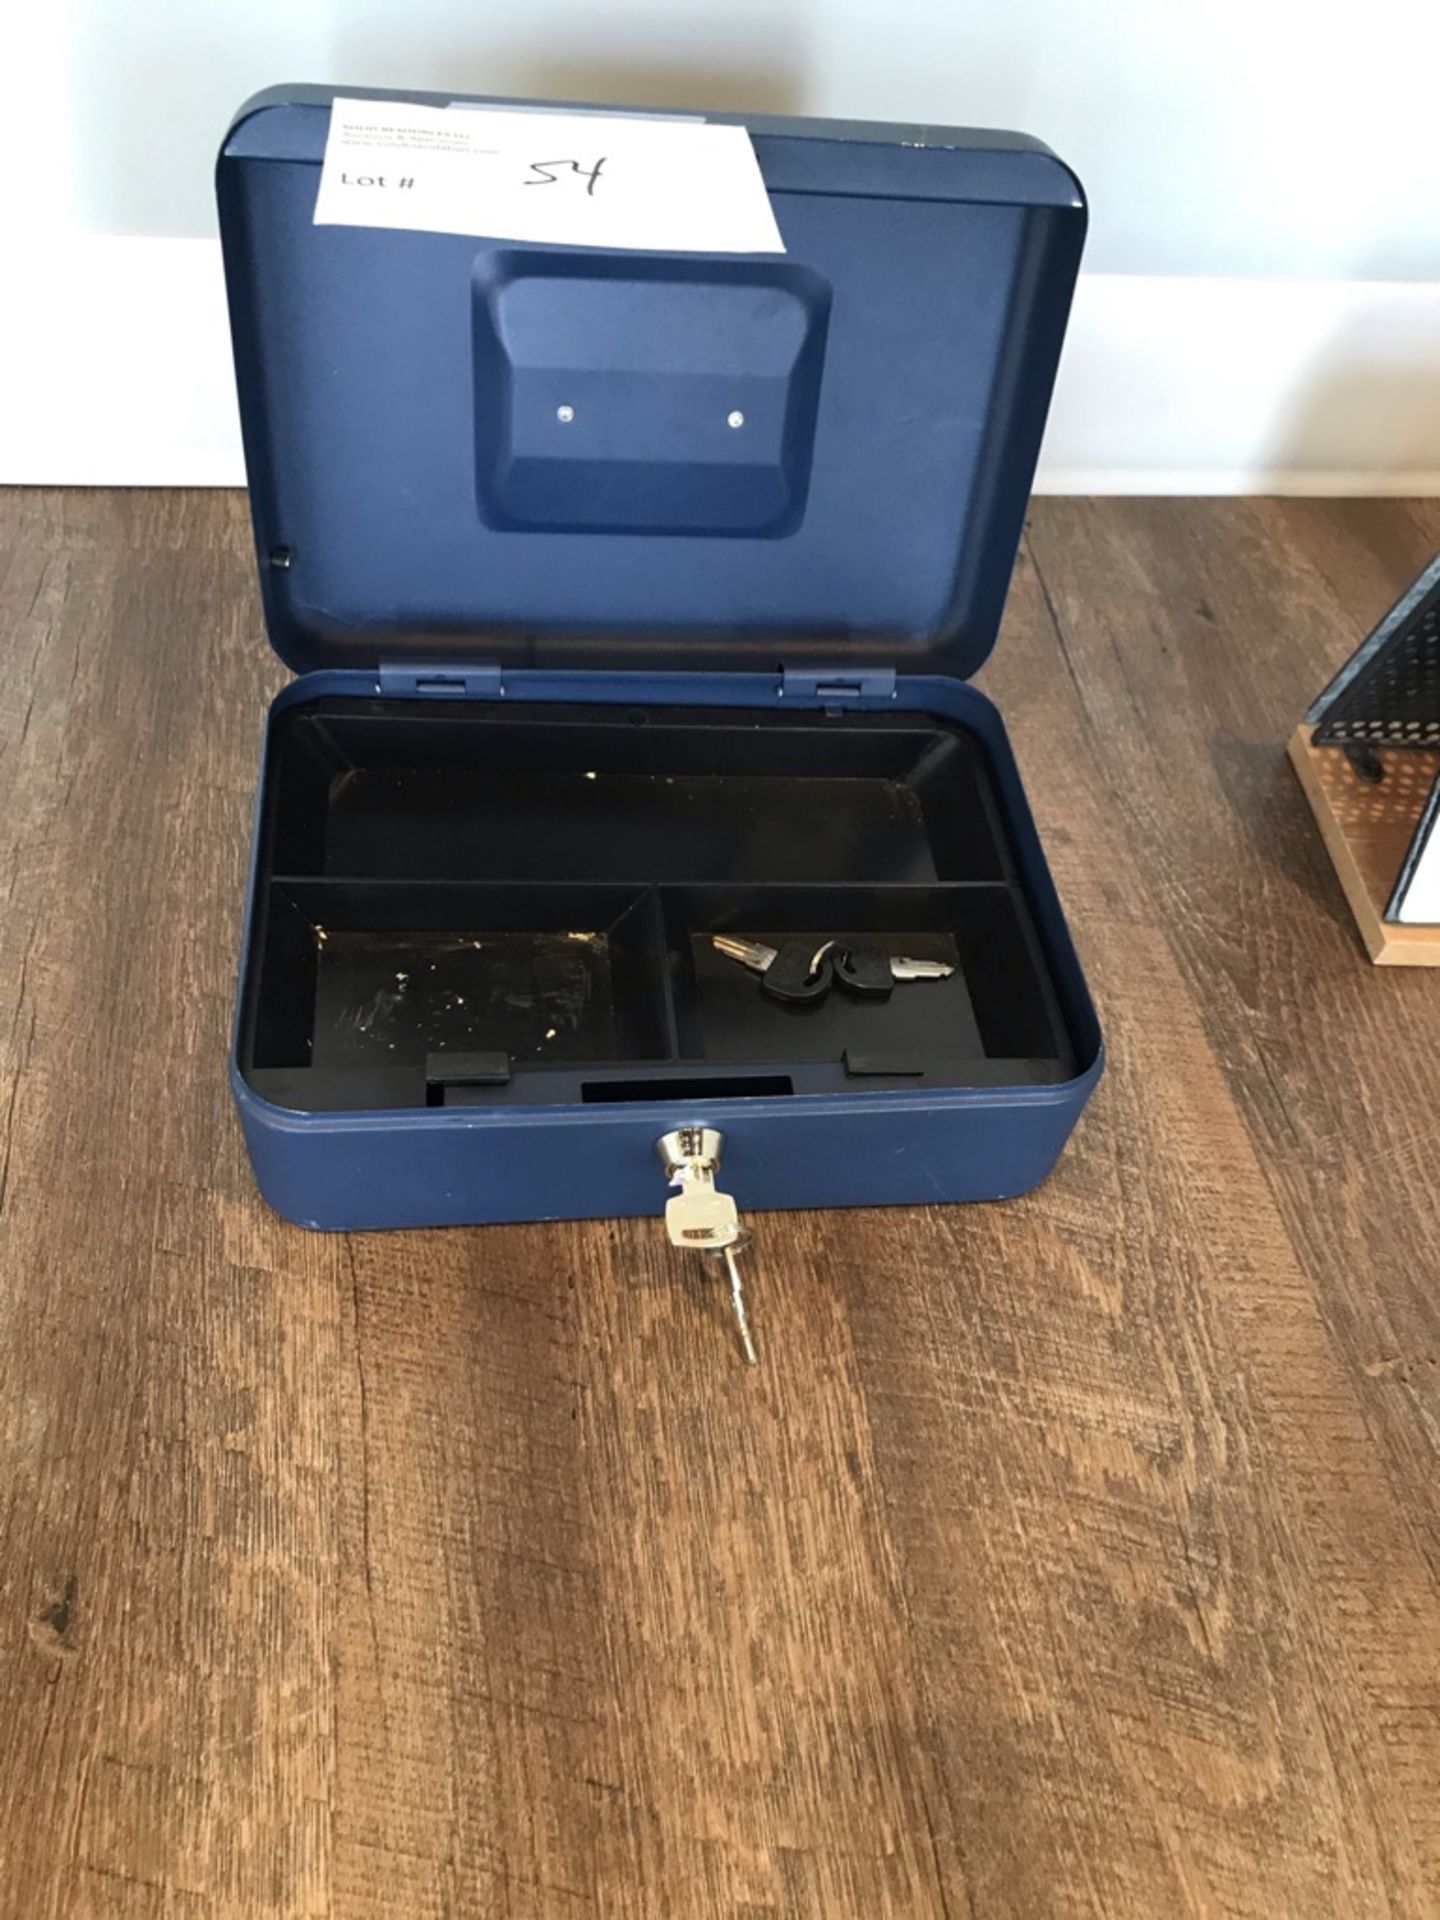 CASH BOX, BLUE METAL CONSTRUCTION WITH 2 KEYS - Image 2 of 3